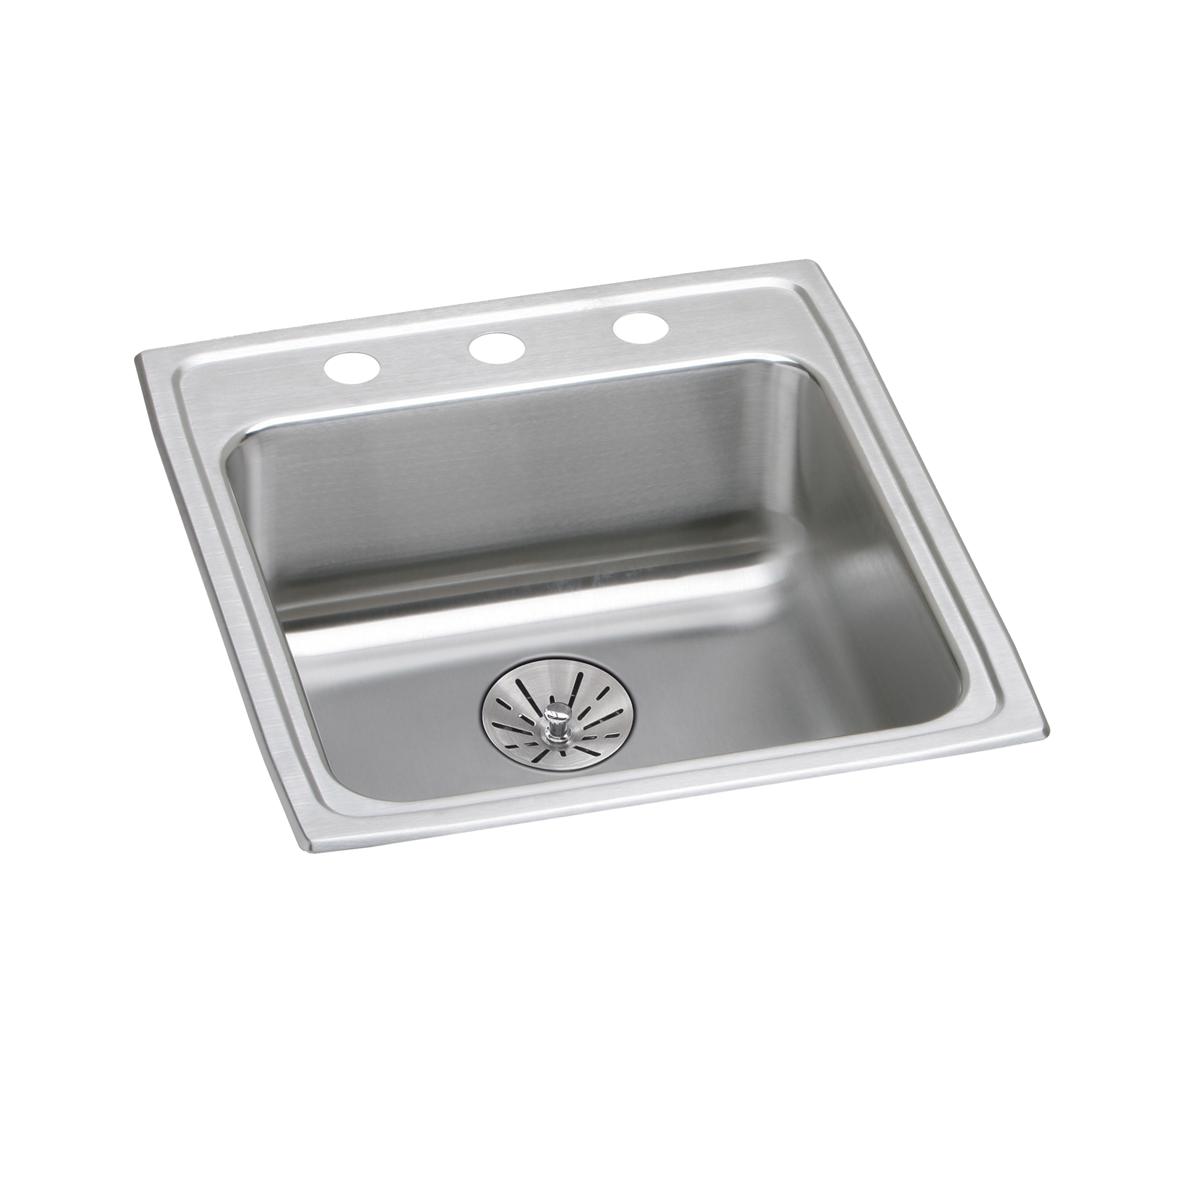 Elkay Lustertone Classic 19-1/2" x 22" x 6-1/2" OS4-Hole Single Bowl Drop-in ADA Sink with Perfect Drain